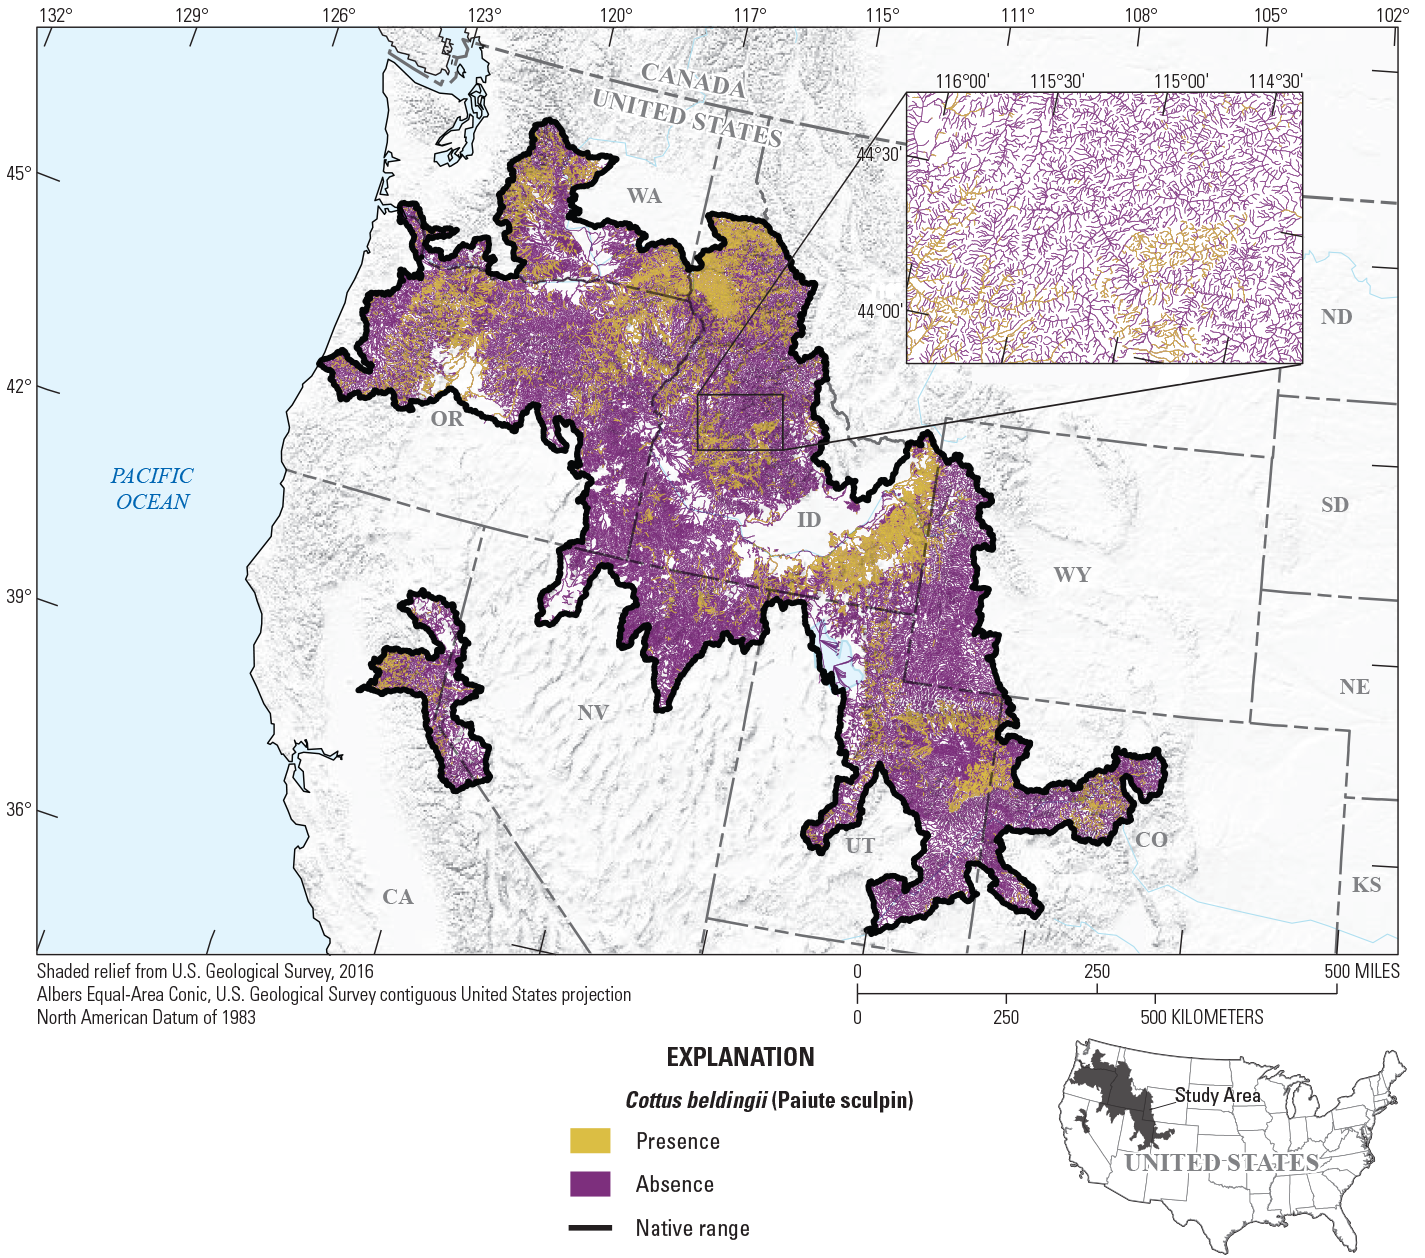 A map of northwestern United States showing streams with predicted presence of Paiute
                     sculpin in gold and absence in purple